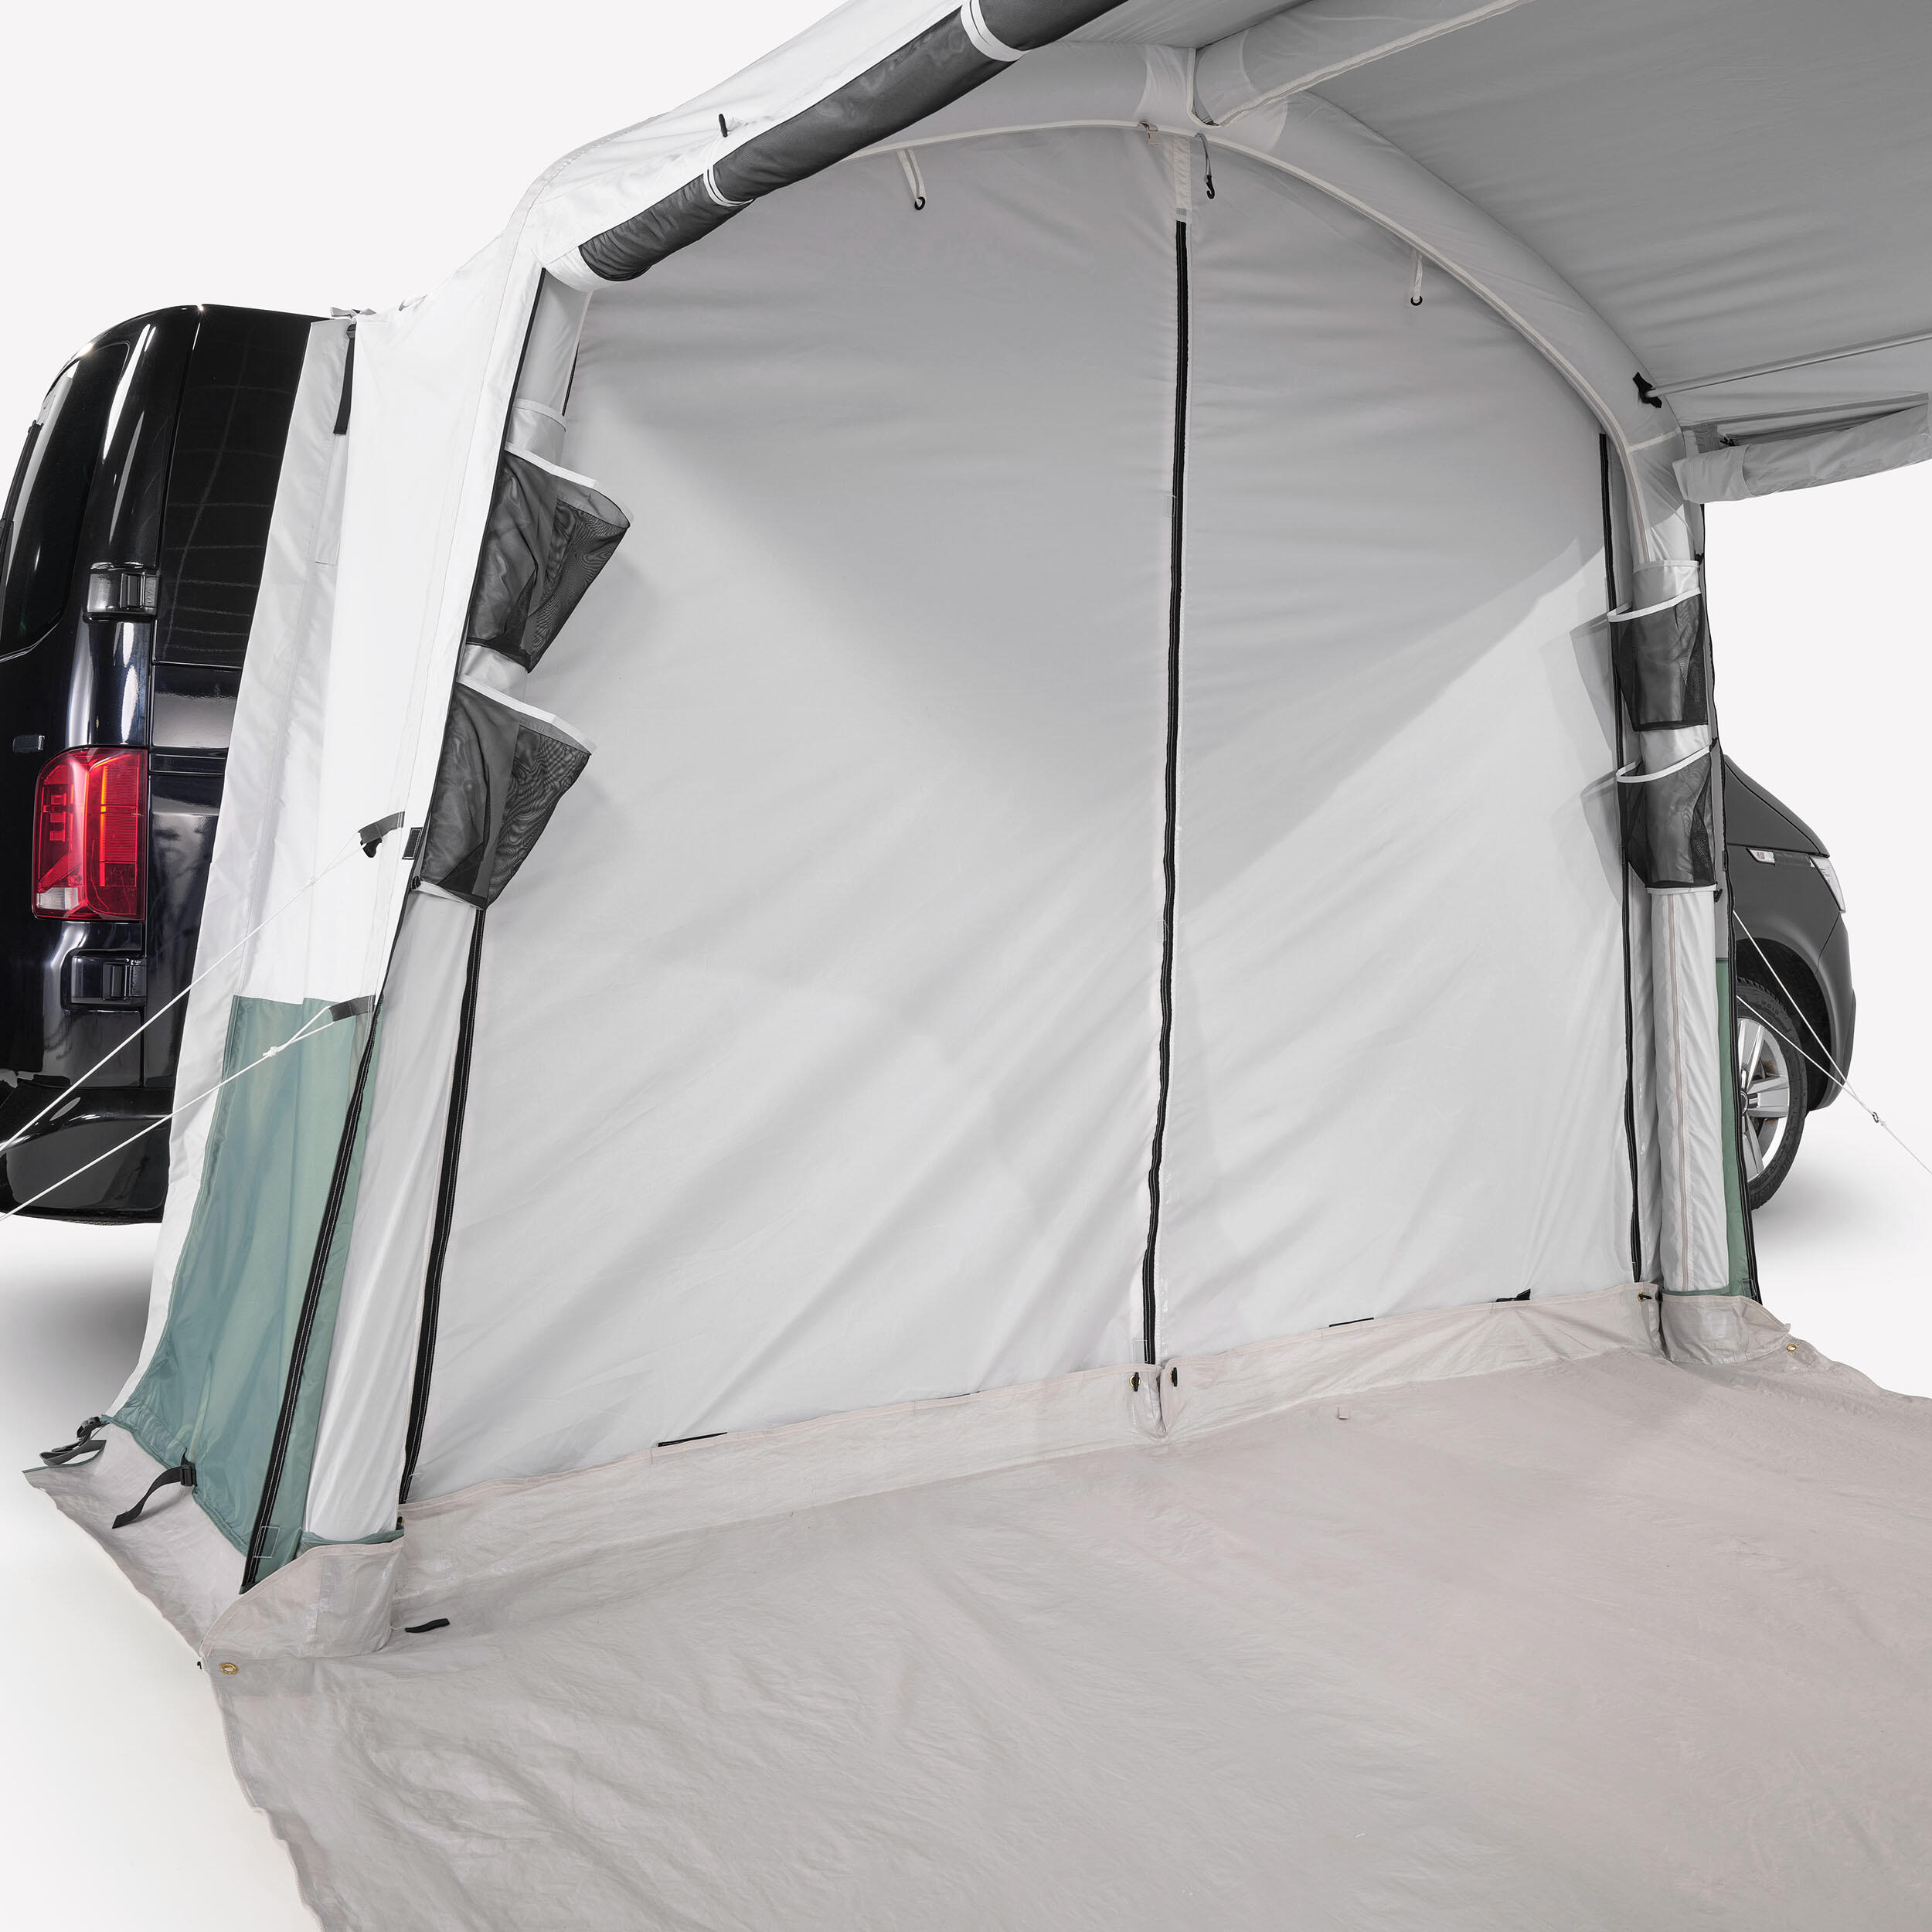 Van and truck inflatable canopy - Van Connect Air Seconds Fresh - 6 people 13/15